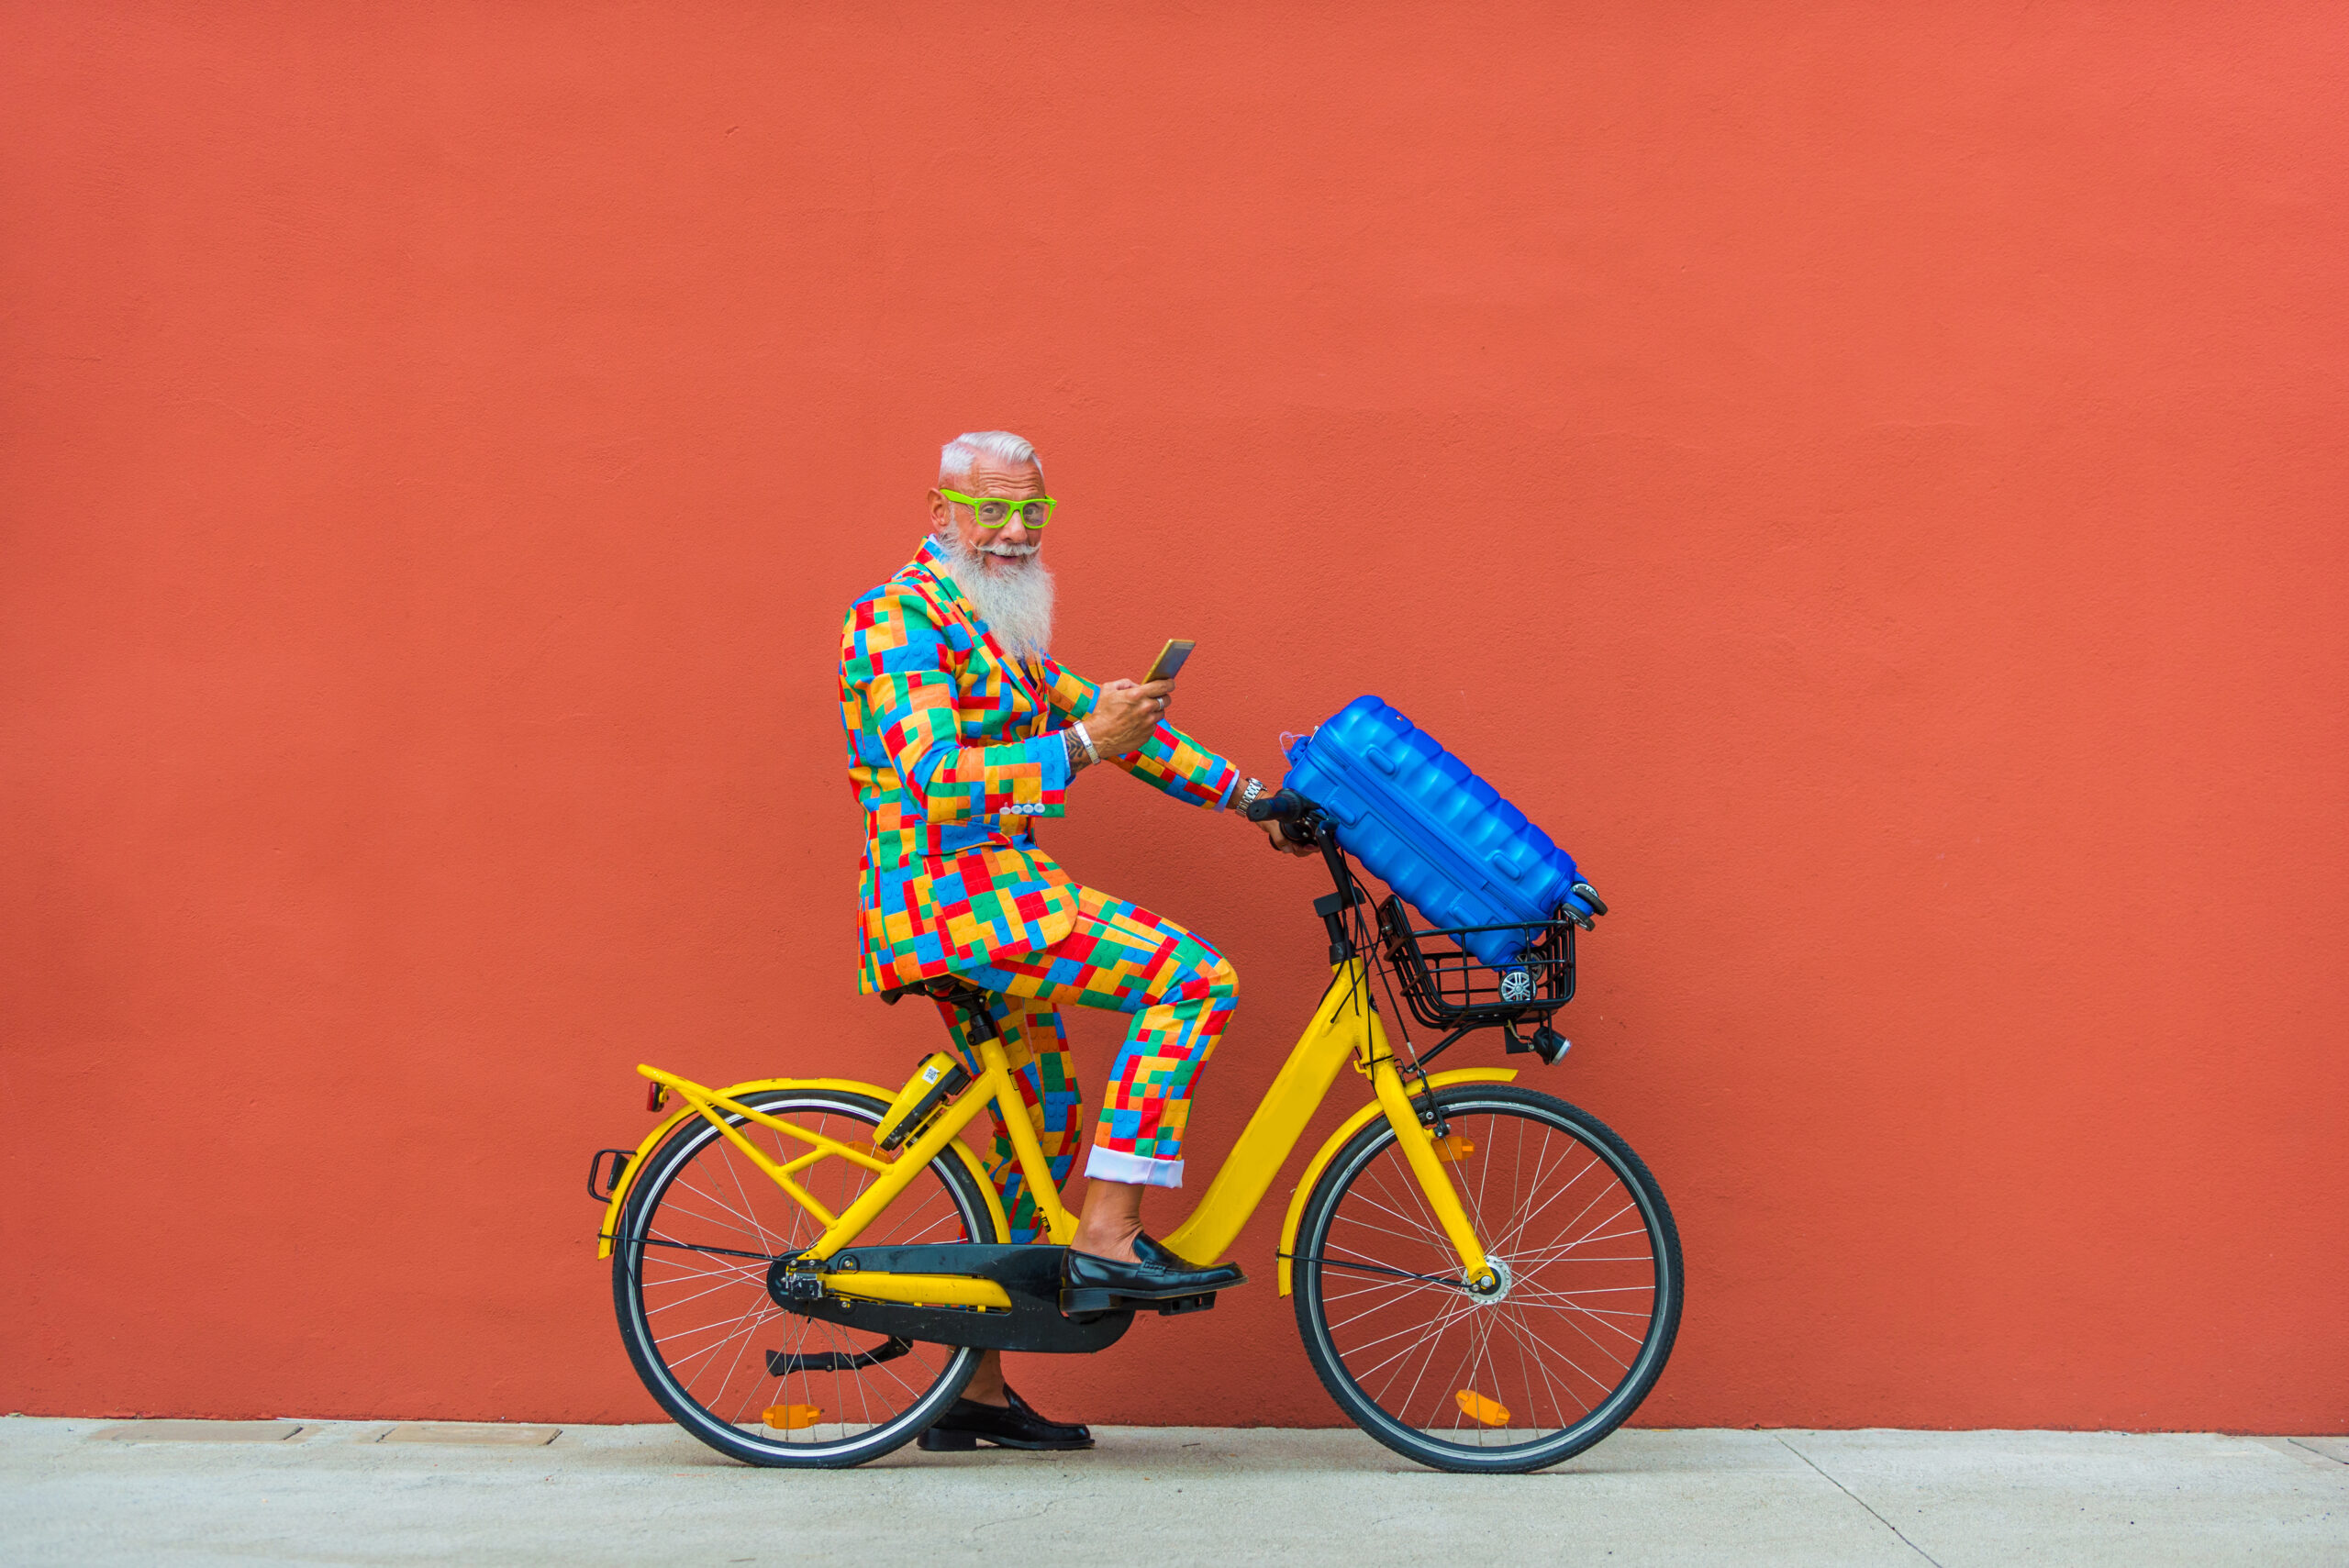 Hipster senior man on bicycle with extravagant style portrait | Homme senior hipster à vélo avec portrait de style extravagant